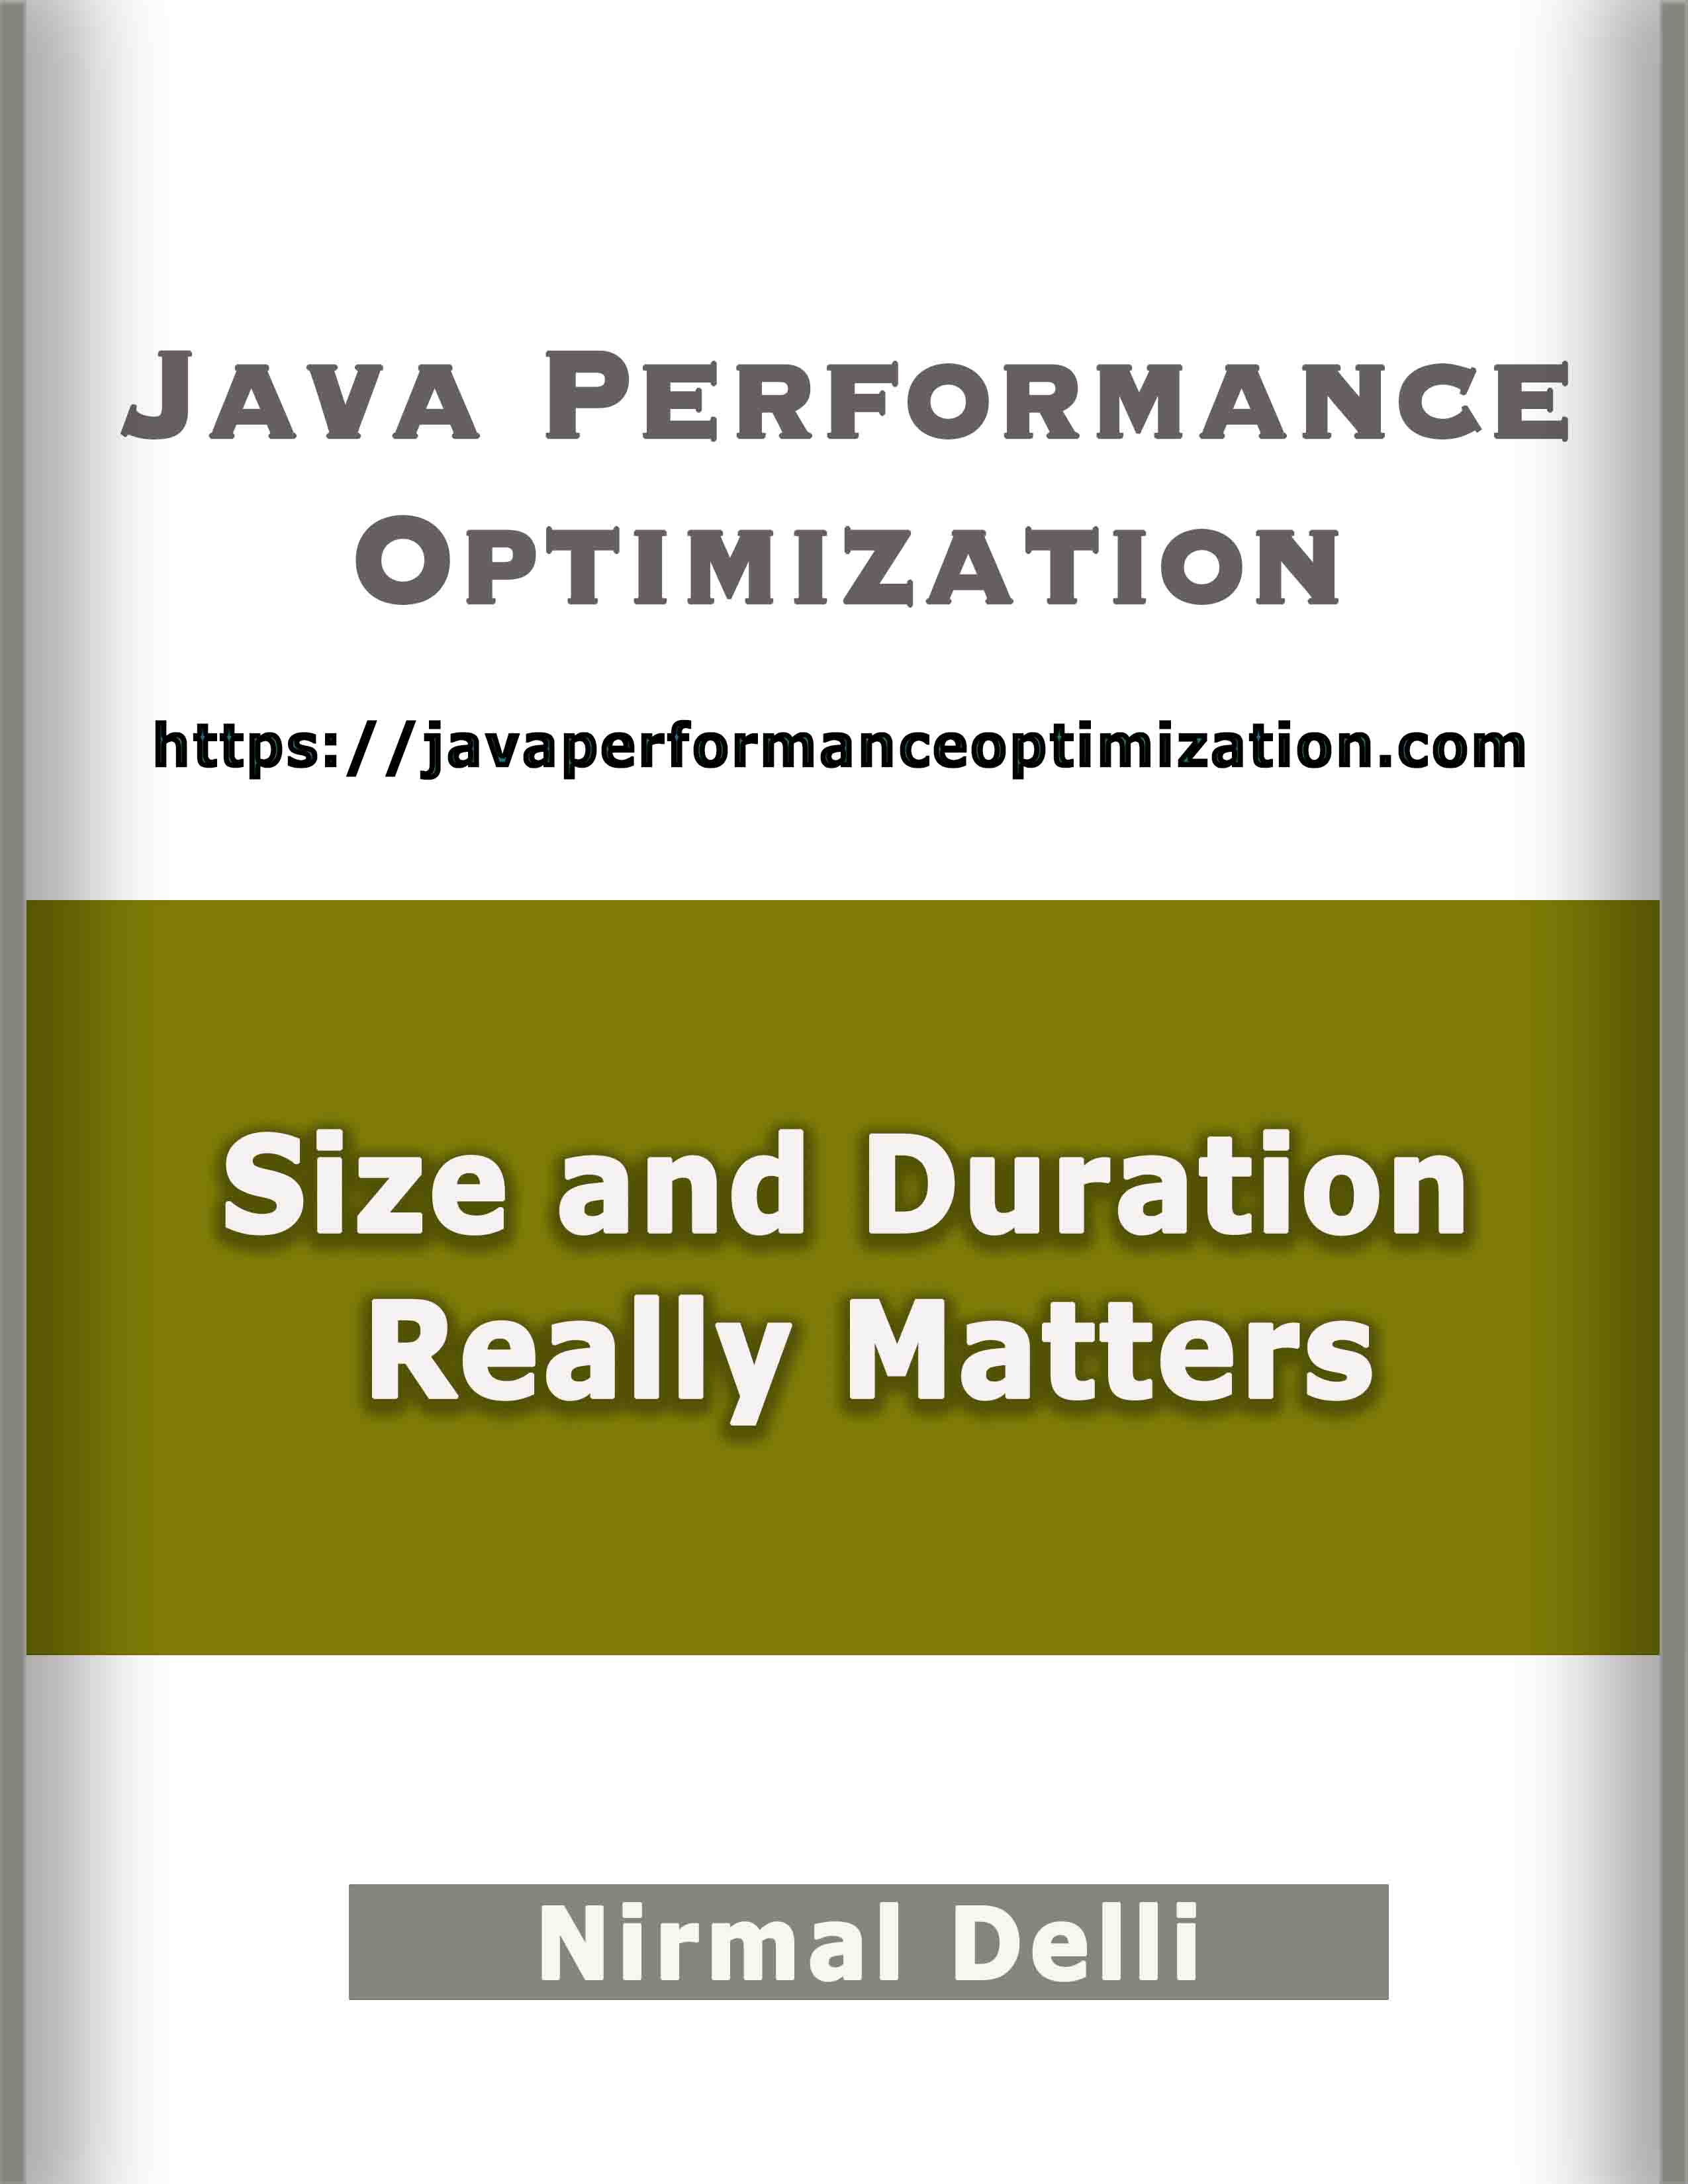 Java performance optimization - Size and Duration Really Matters